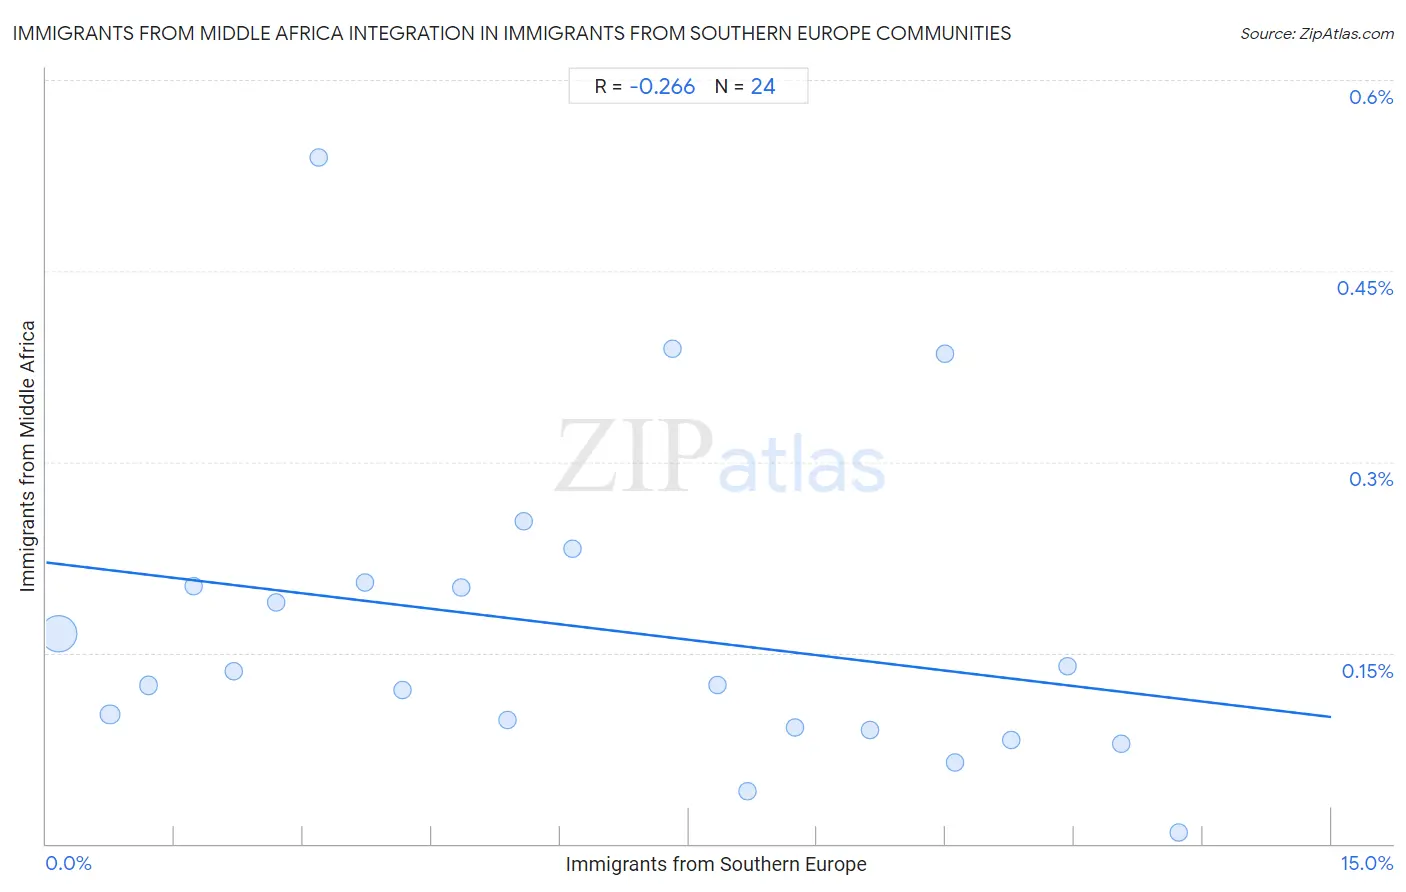 Immigrants from Southern Europe Integration in Immigrants from Middle Africa Communities